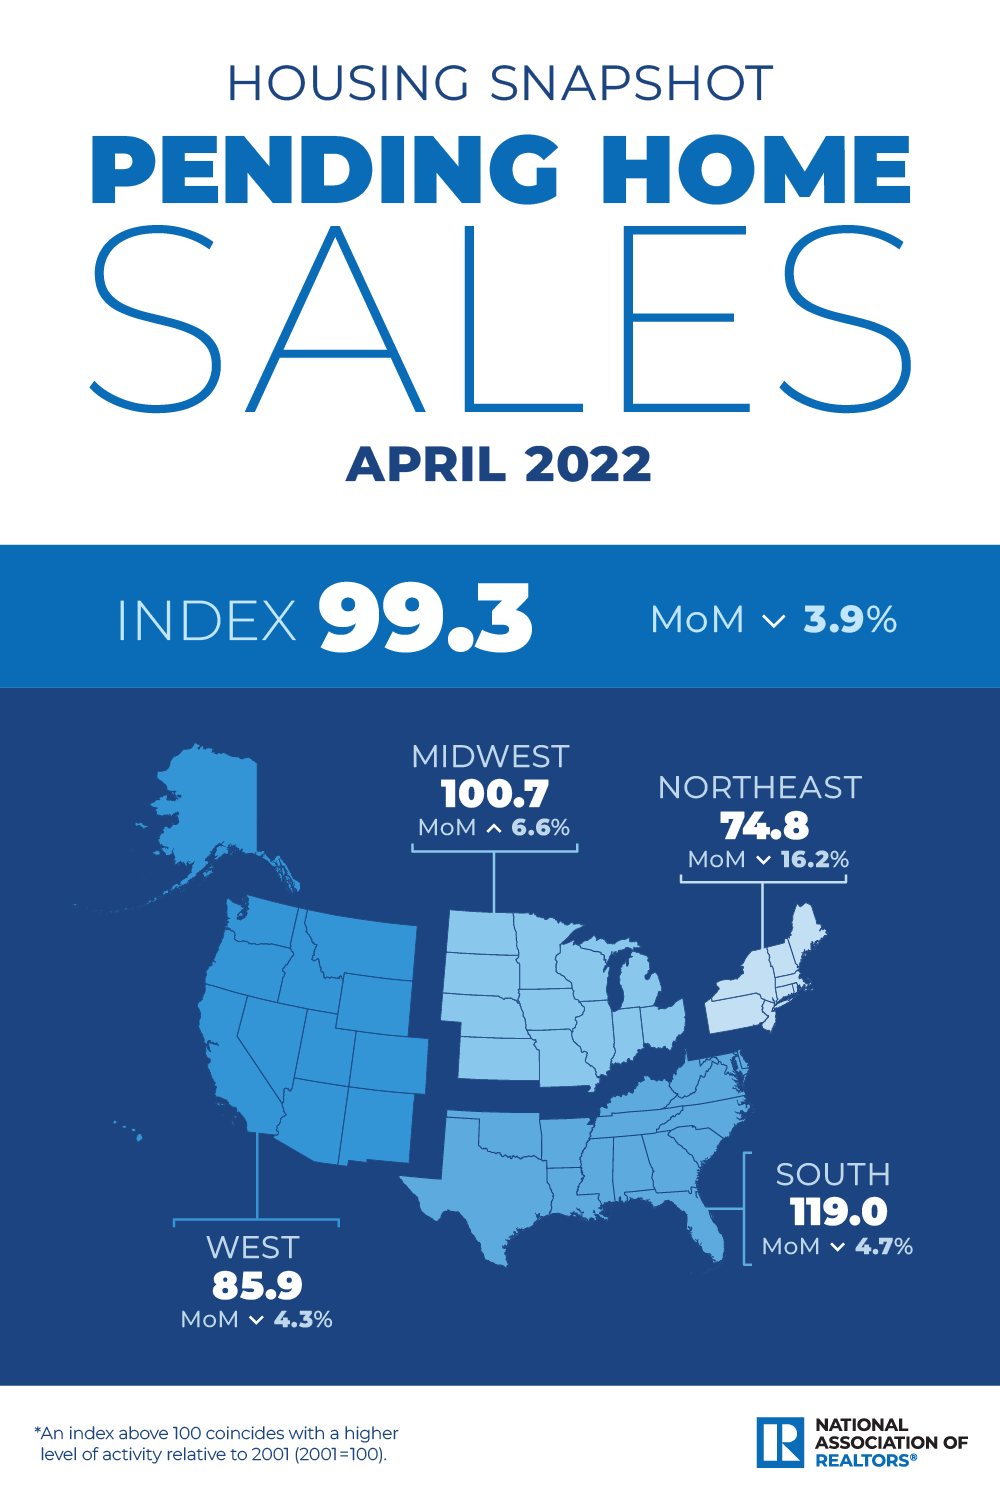 A map of the U.S. on a gradient color scale showing a snapshot of pending home sales for April 2022.